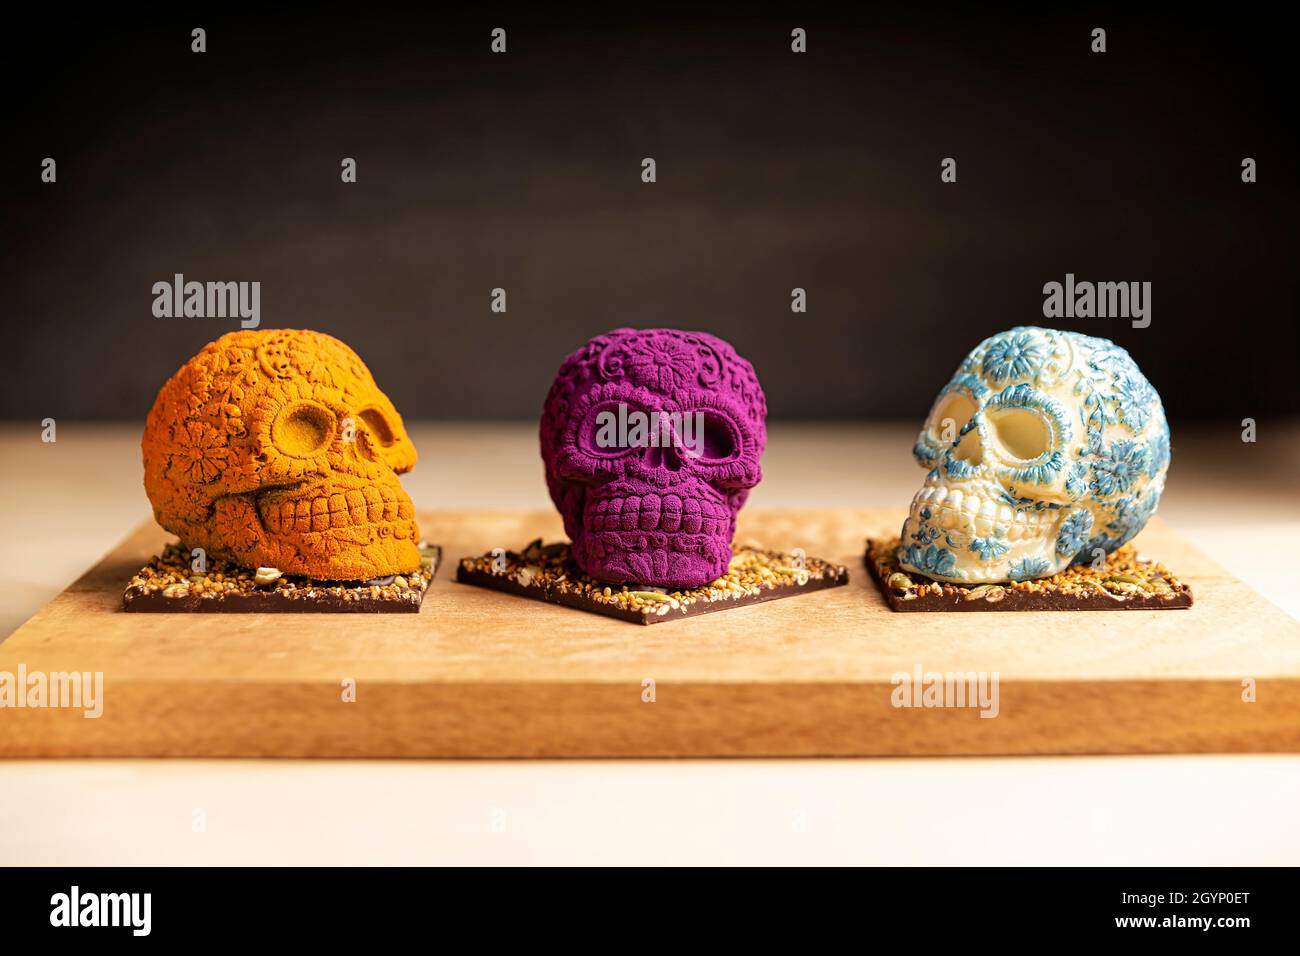 set of edible ornamented mexican skulls made of chocolate, traditional gift for 'dia de muertos' day of the death in Mexico culture named 'calaverita Stock Photo